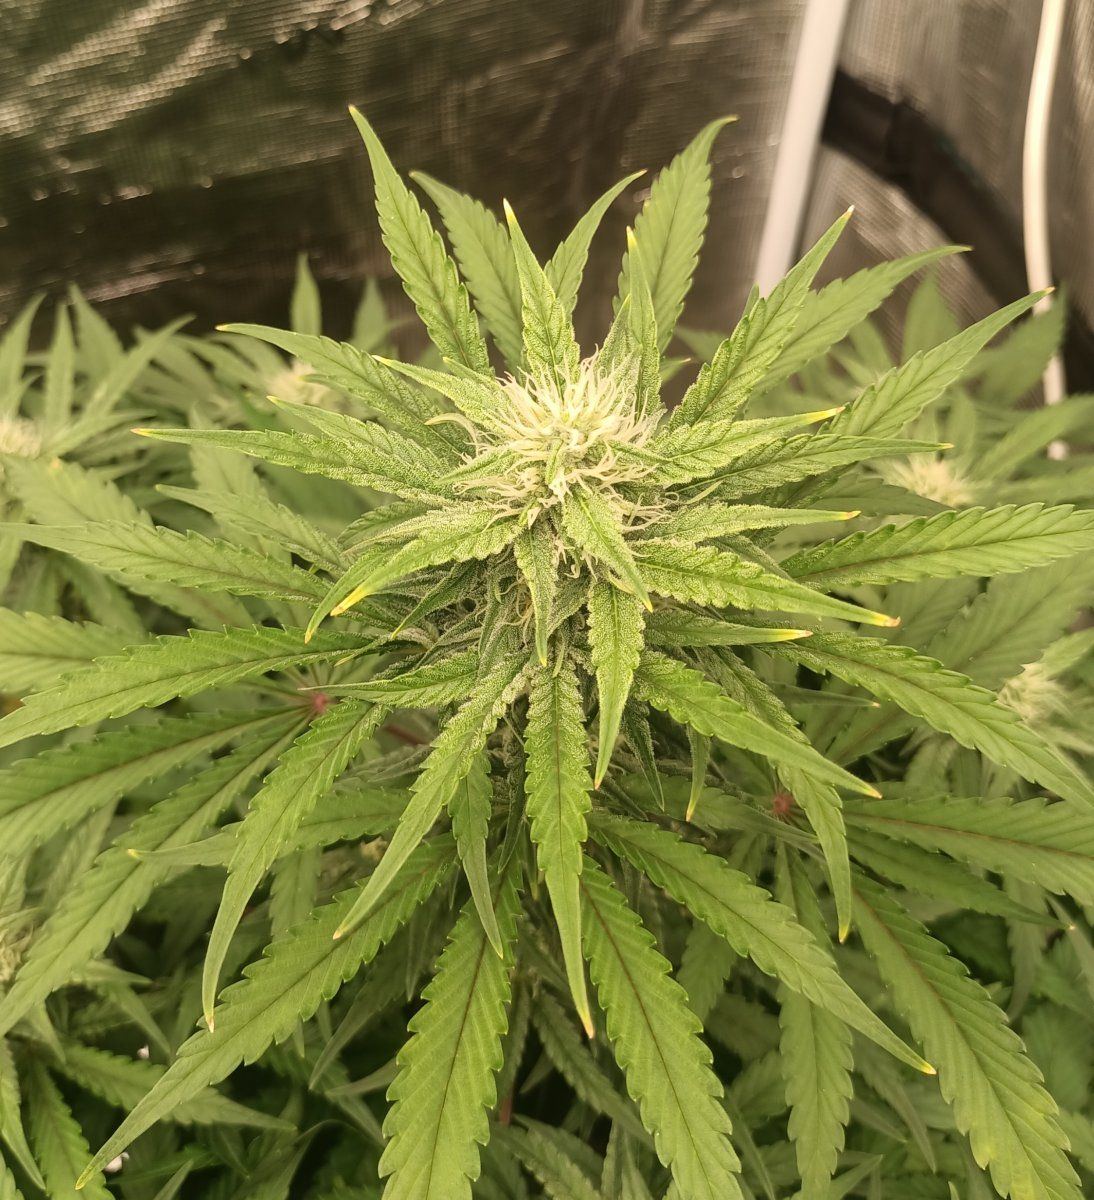 Whats wrong with my plants 3